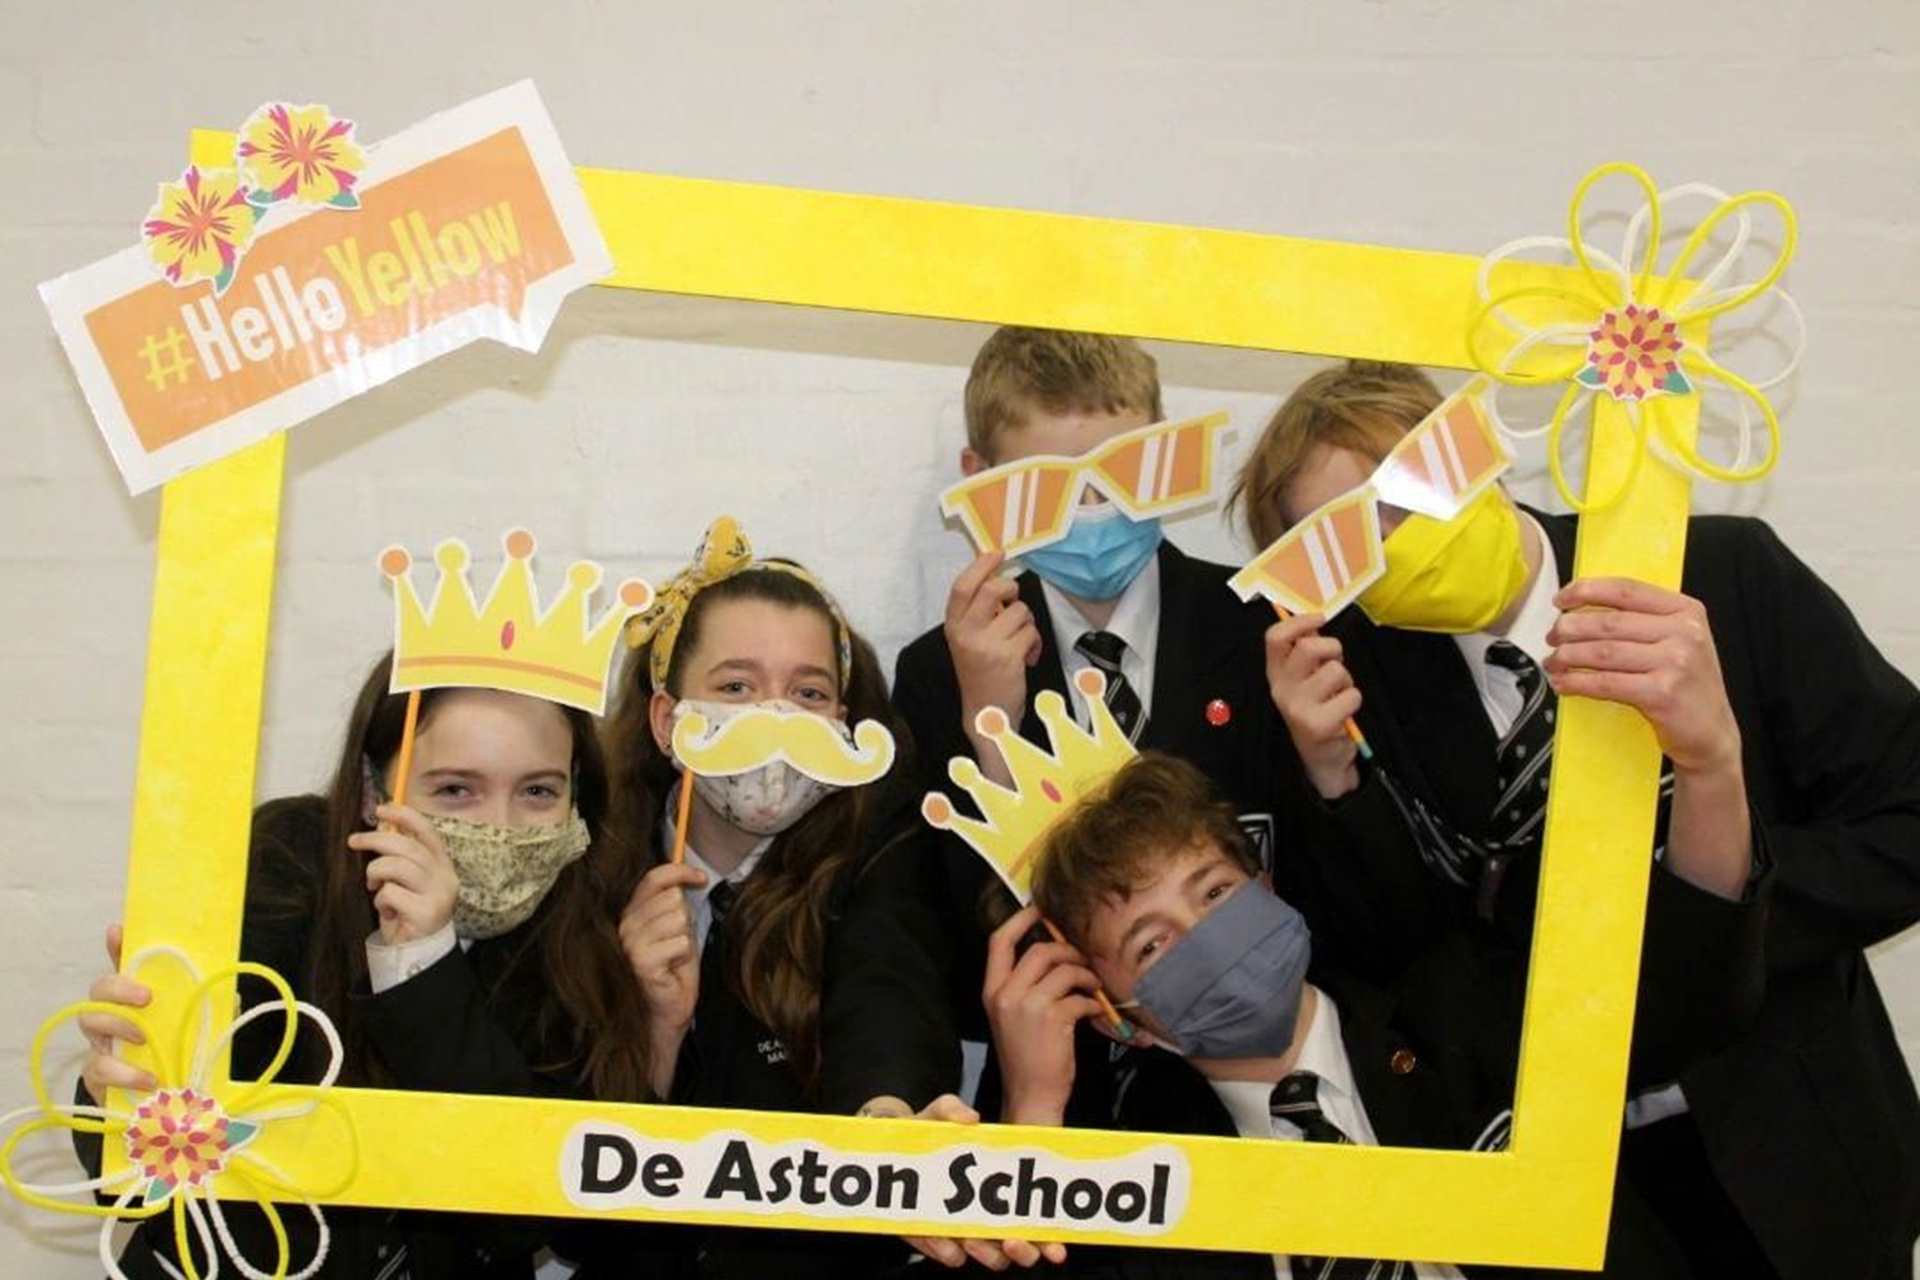 Five young people pose in a yellow photo frame with different yellow props including crowns, a yellow moustache and sunglasses. They are all wearing face masks and are facing the camera.